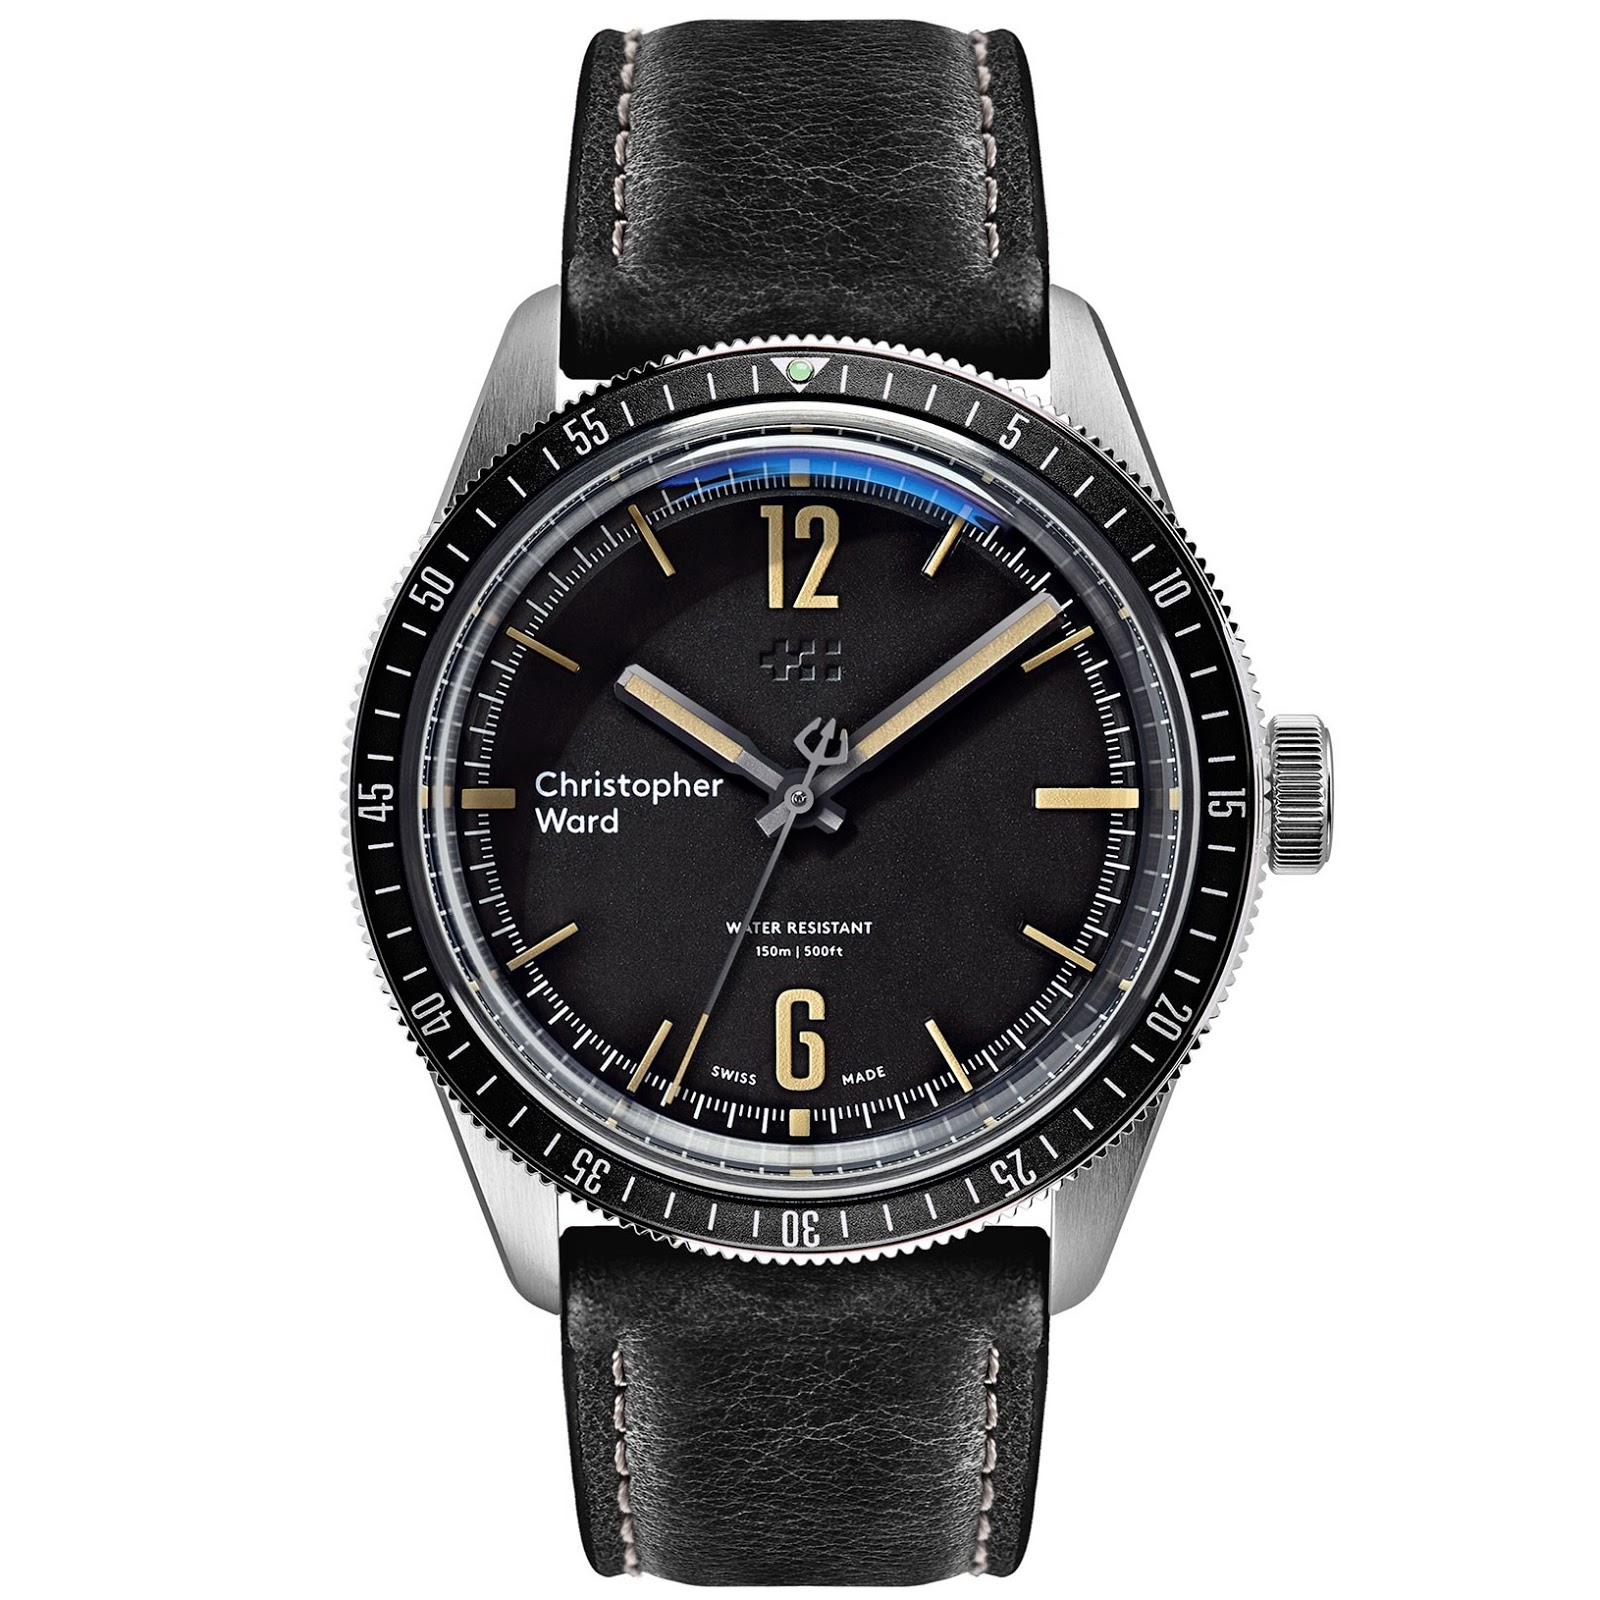 Christopher Ward's new C65 Trident Diver CHRISTOPHER%2BWARD%2BC65%2BTrident%2BDIVER%2B03